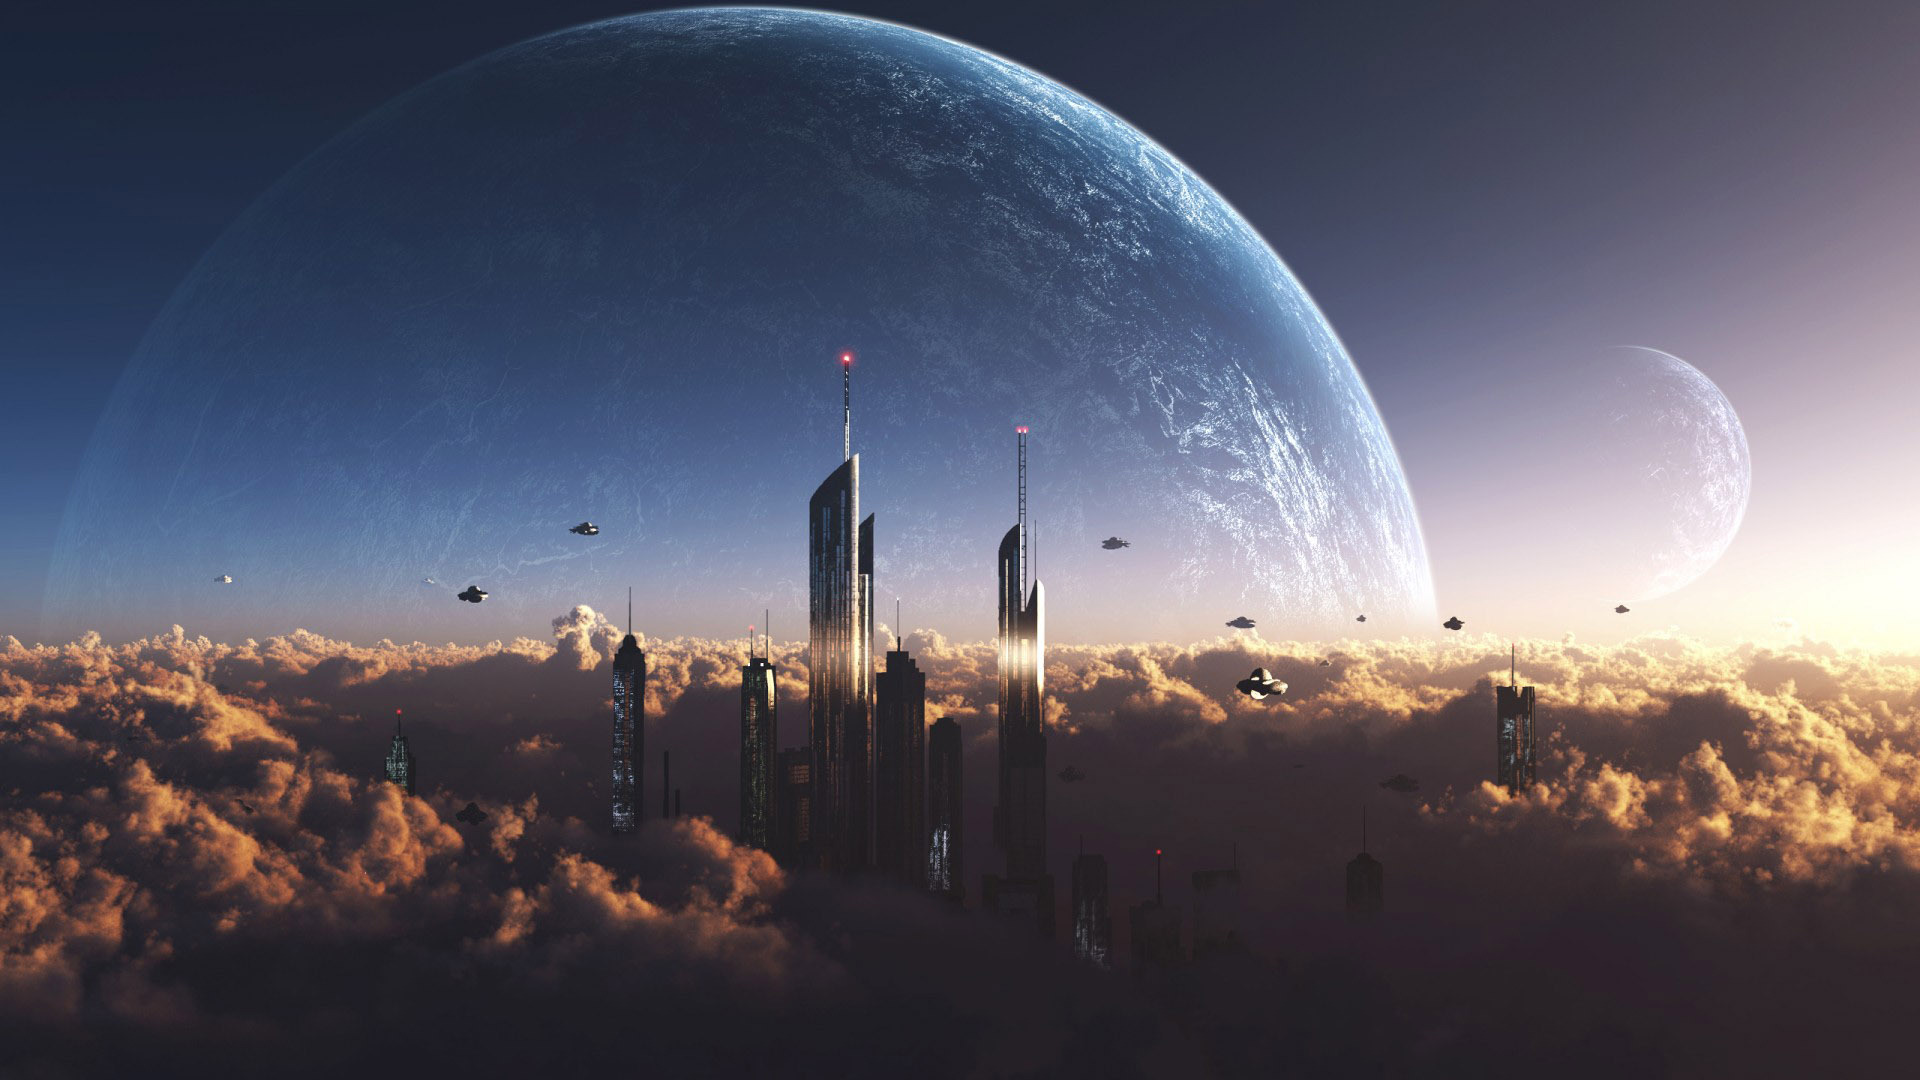 Download wallpaper 800x1200 scifi city future art buildings cars  iphone 4s4 for parallax hd background